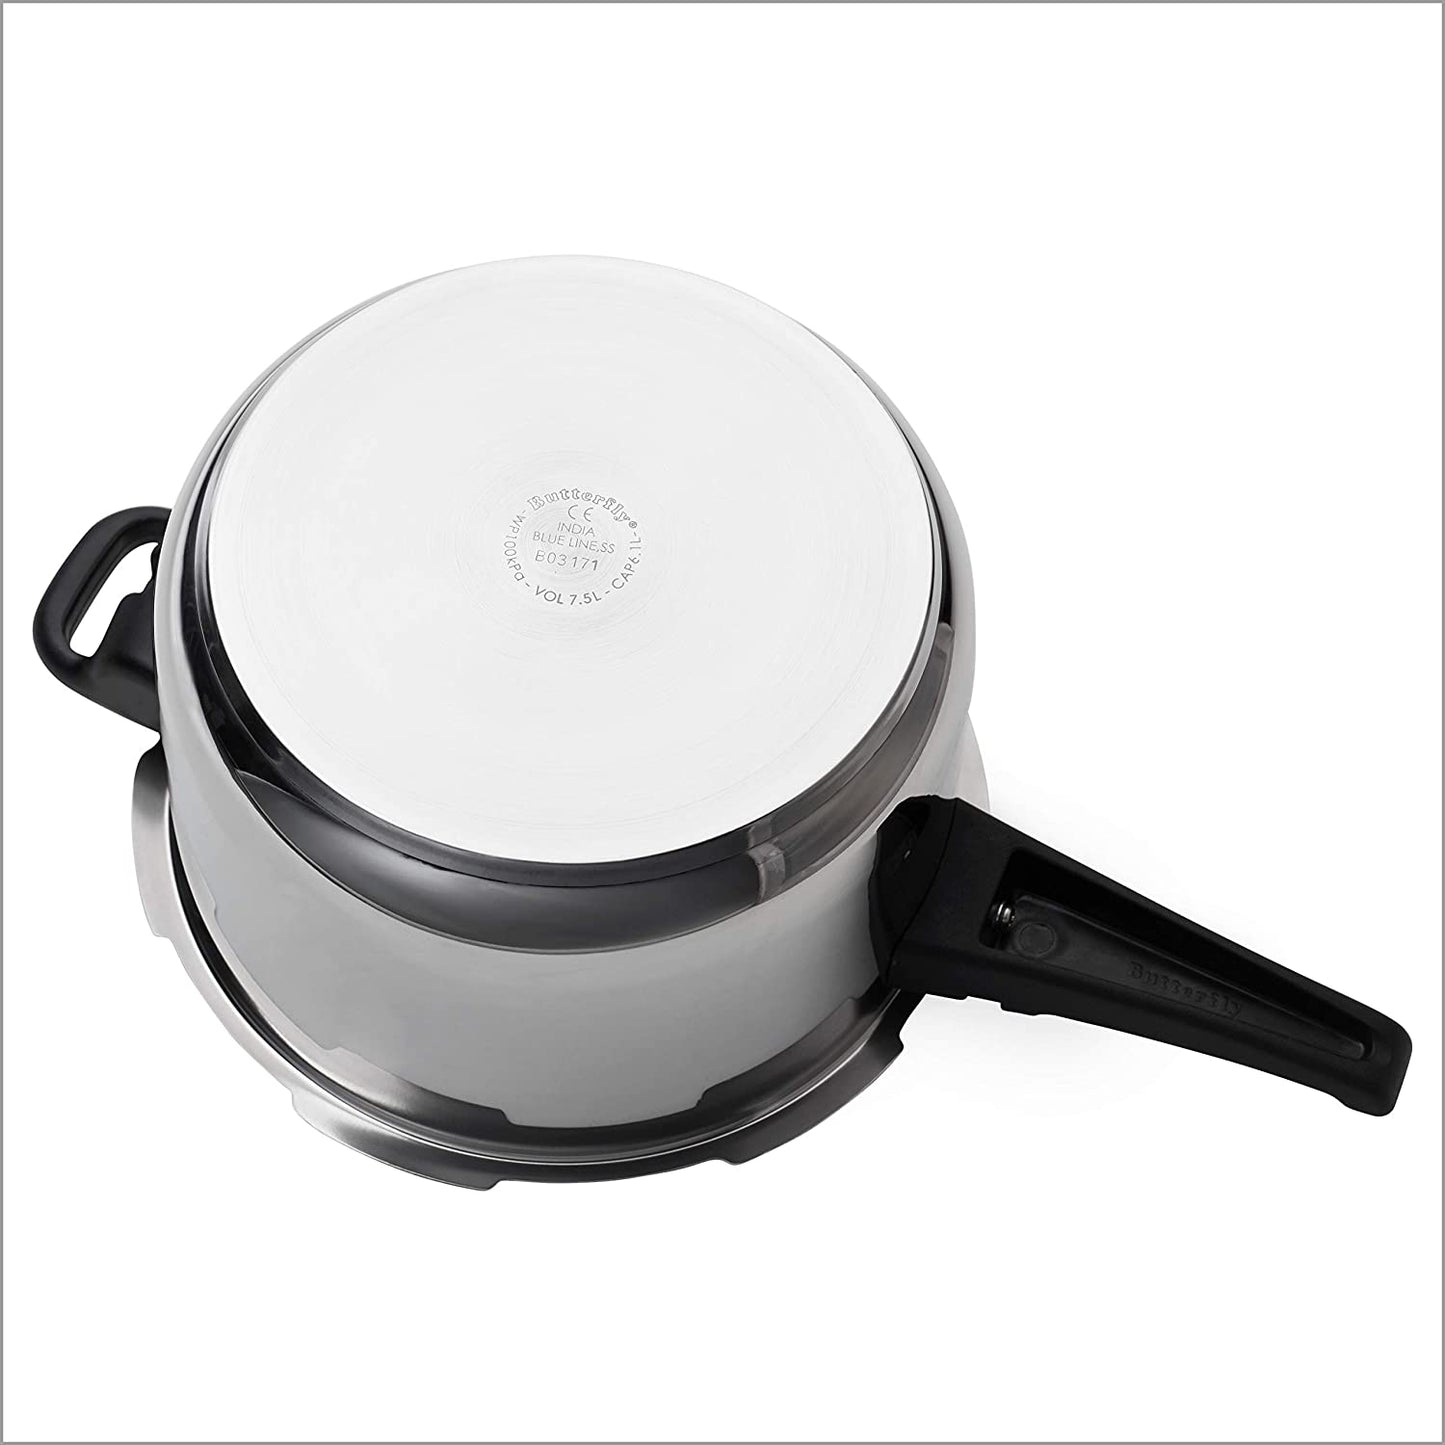 Butterfly Blueline Stainless Steel Induction Base Outer Lid Pressure Cooker, 7.5 Litres